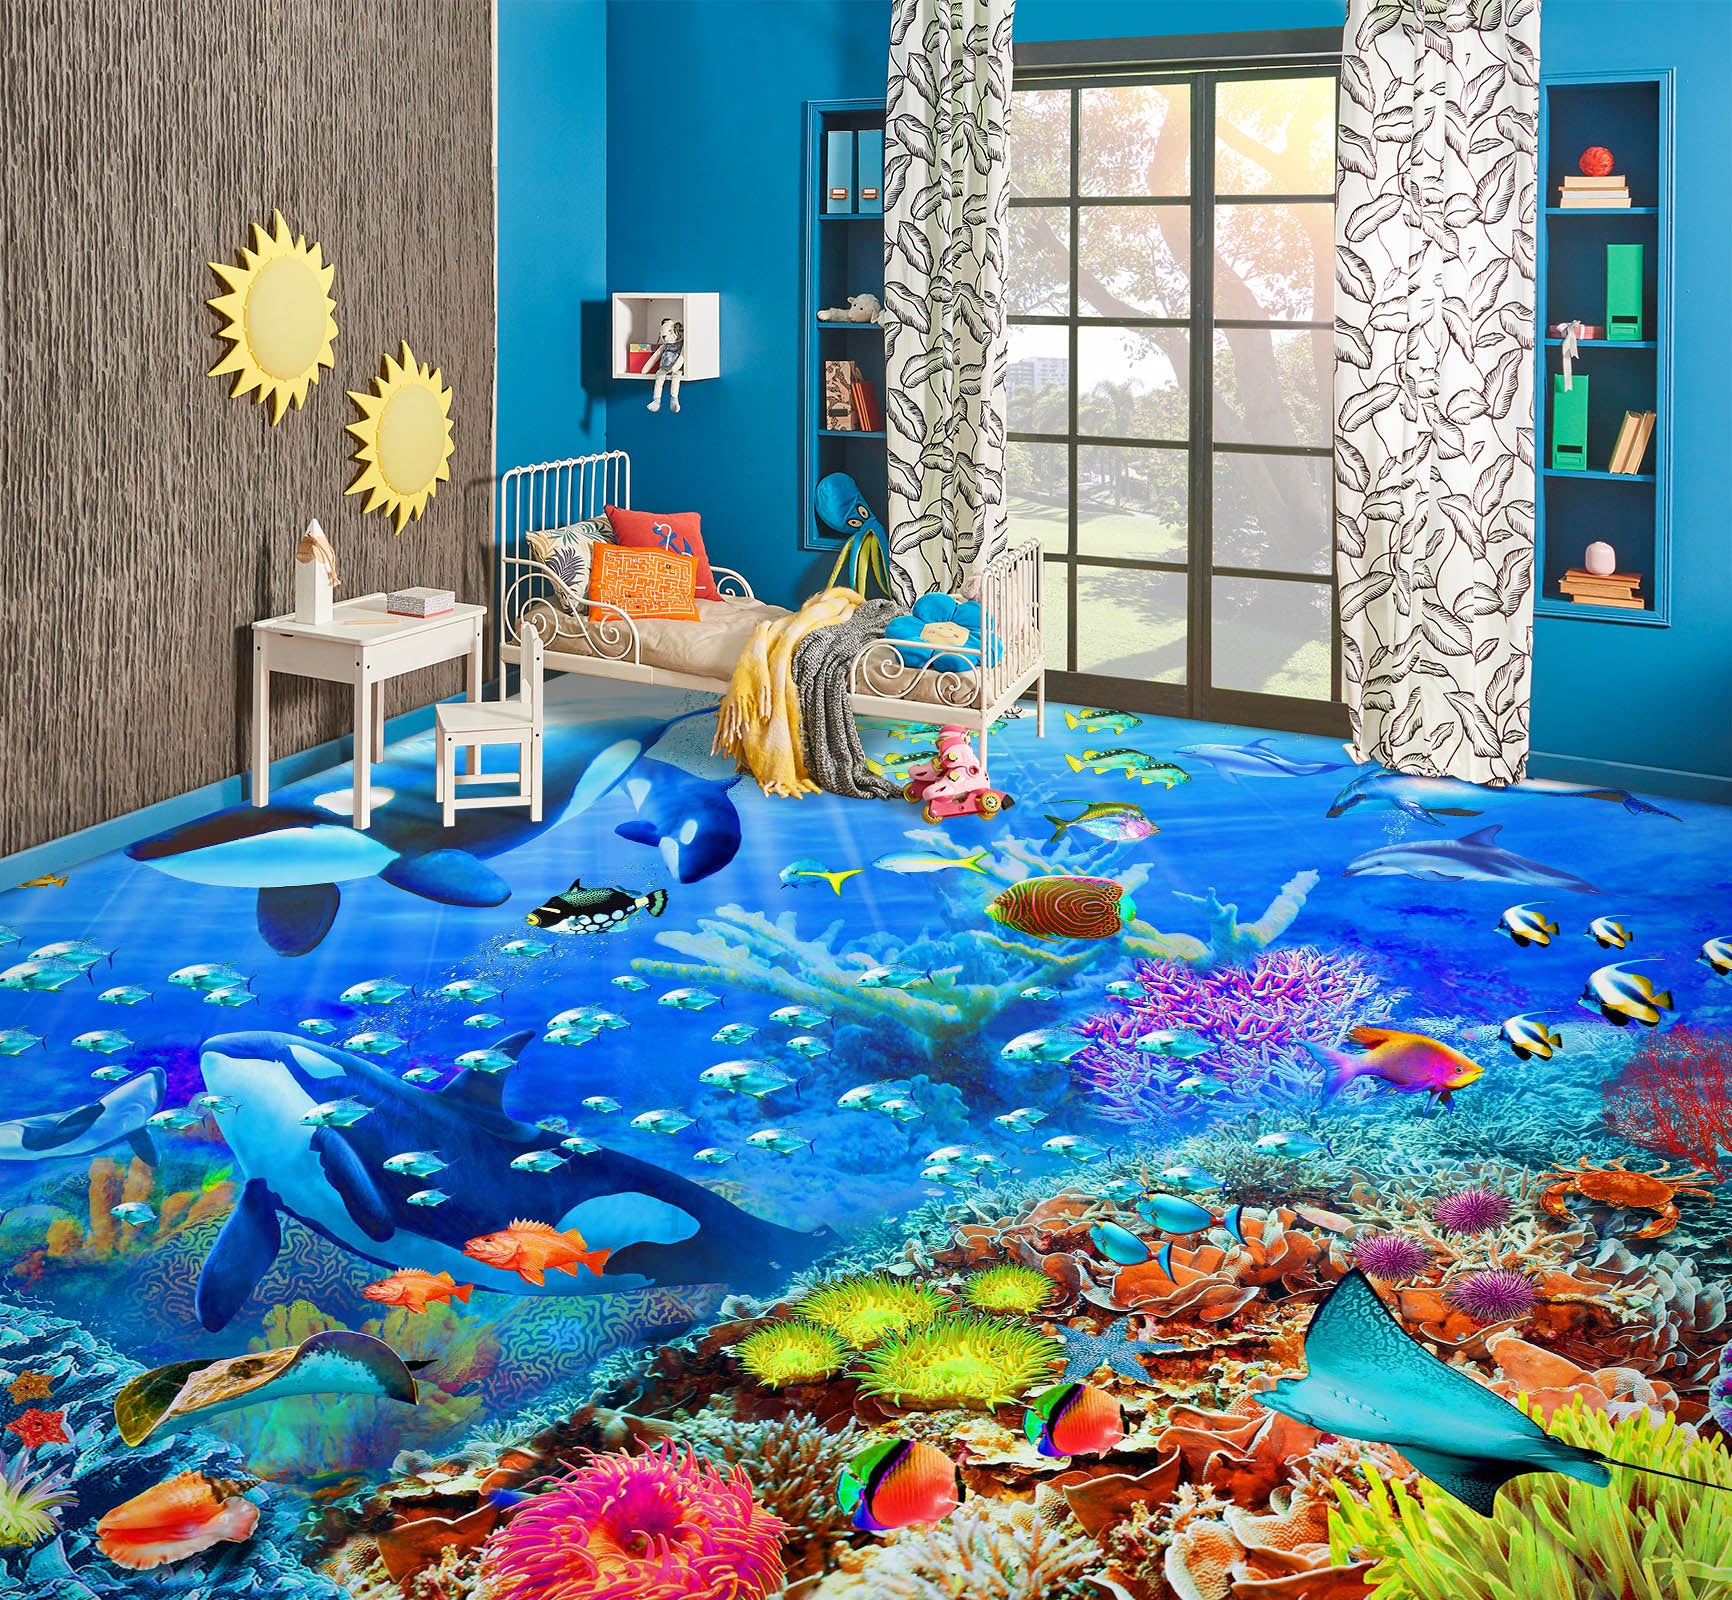 3D Seabed Coral Fish 98165 Adrian Chesterman Floor Mural  Wallpaper Murals Self-Adhesive Removable Print Epoxy